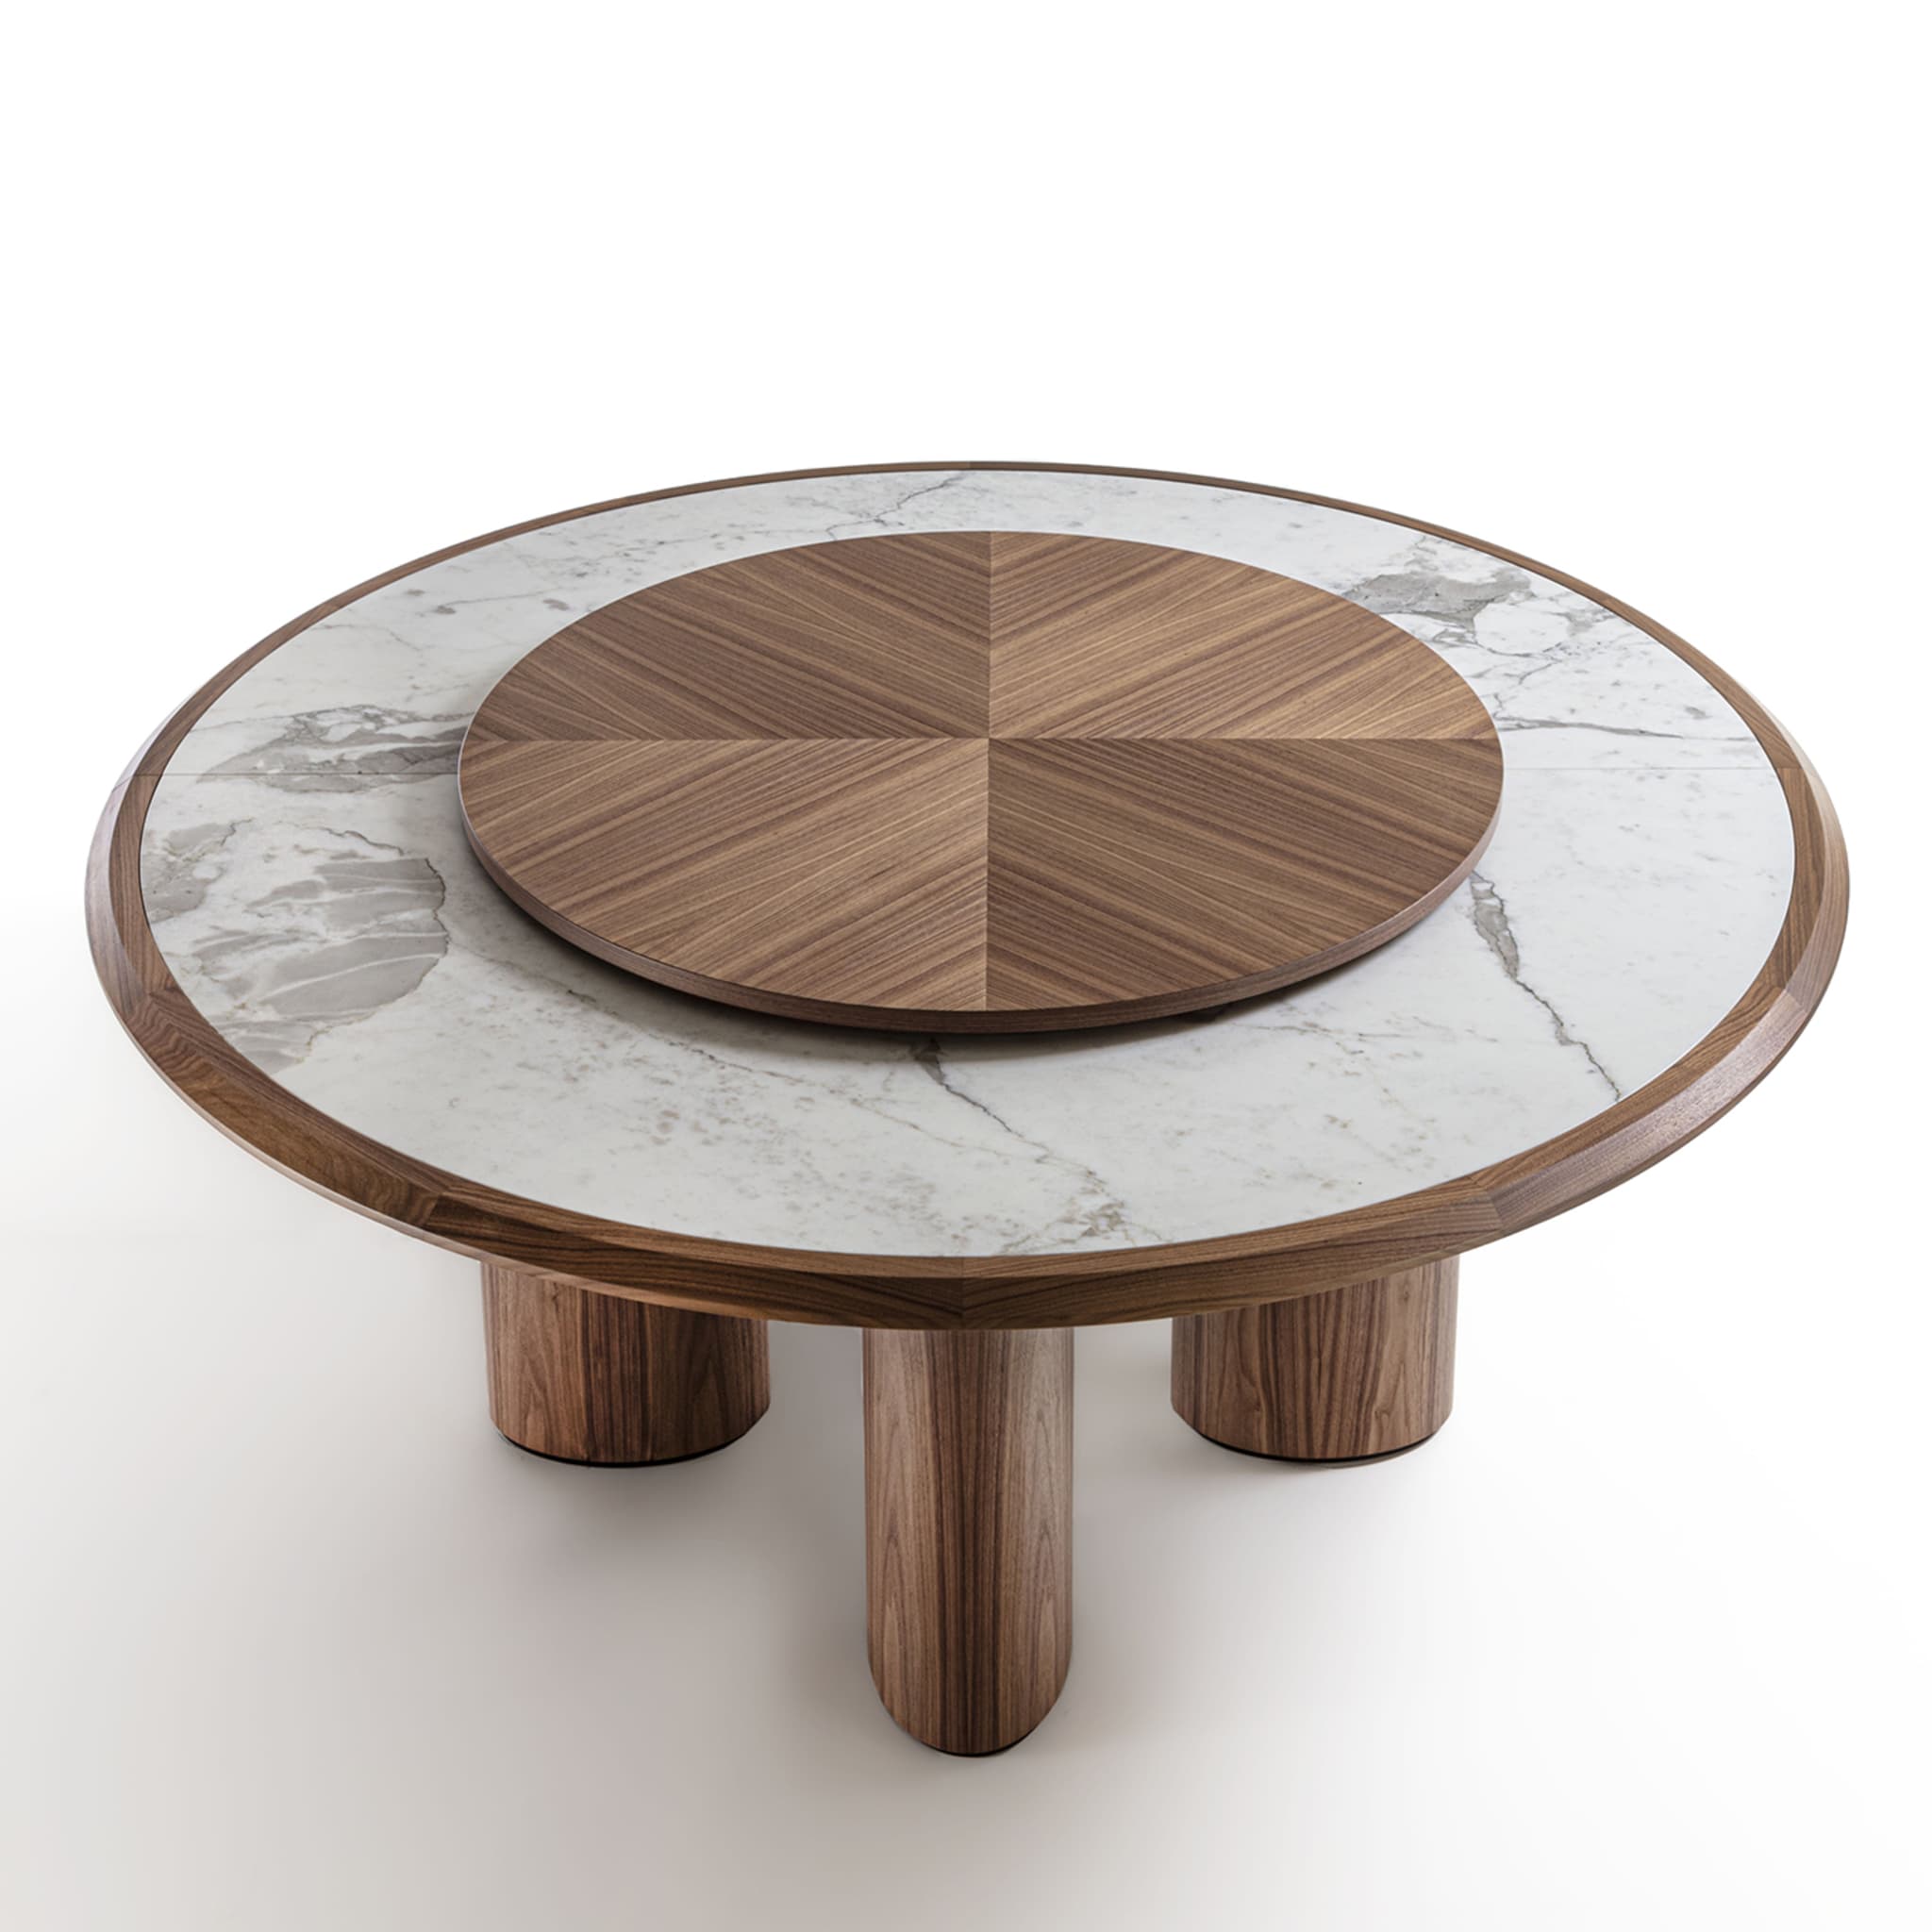 Diamante Round Canaletto & Carrara Marble Table with Lazy Susan - Alternative view 1